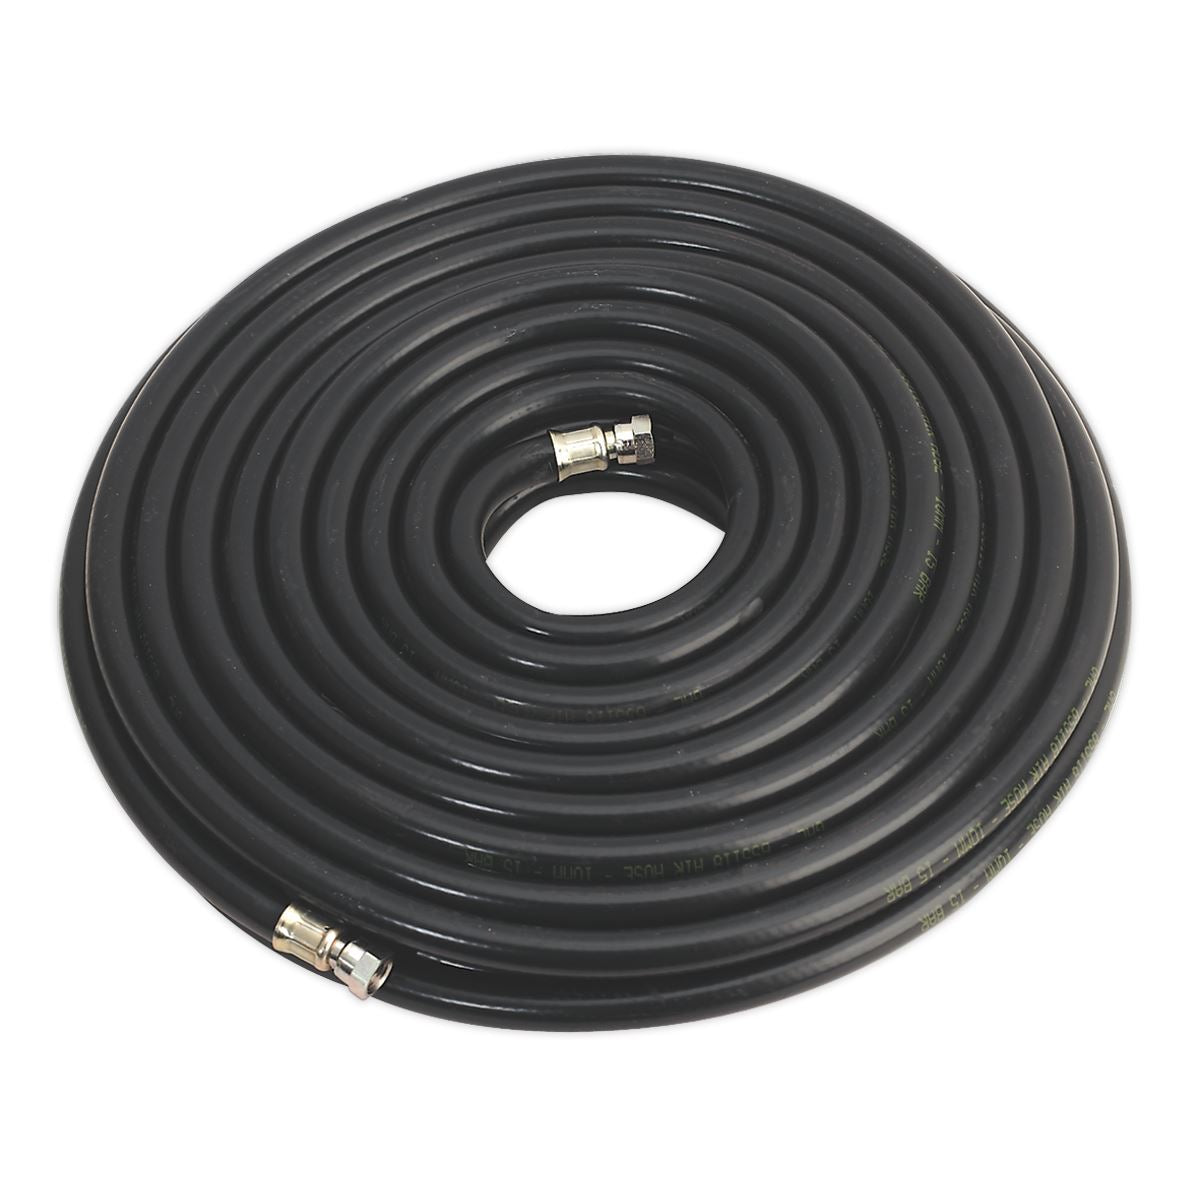 Sealey Air Hose 20m x Ø10mm with 1/4"BSP Unions Heavy-Duty